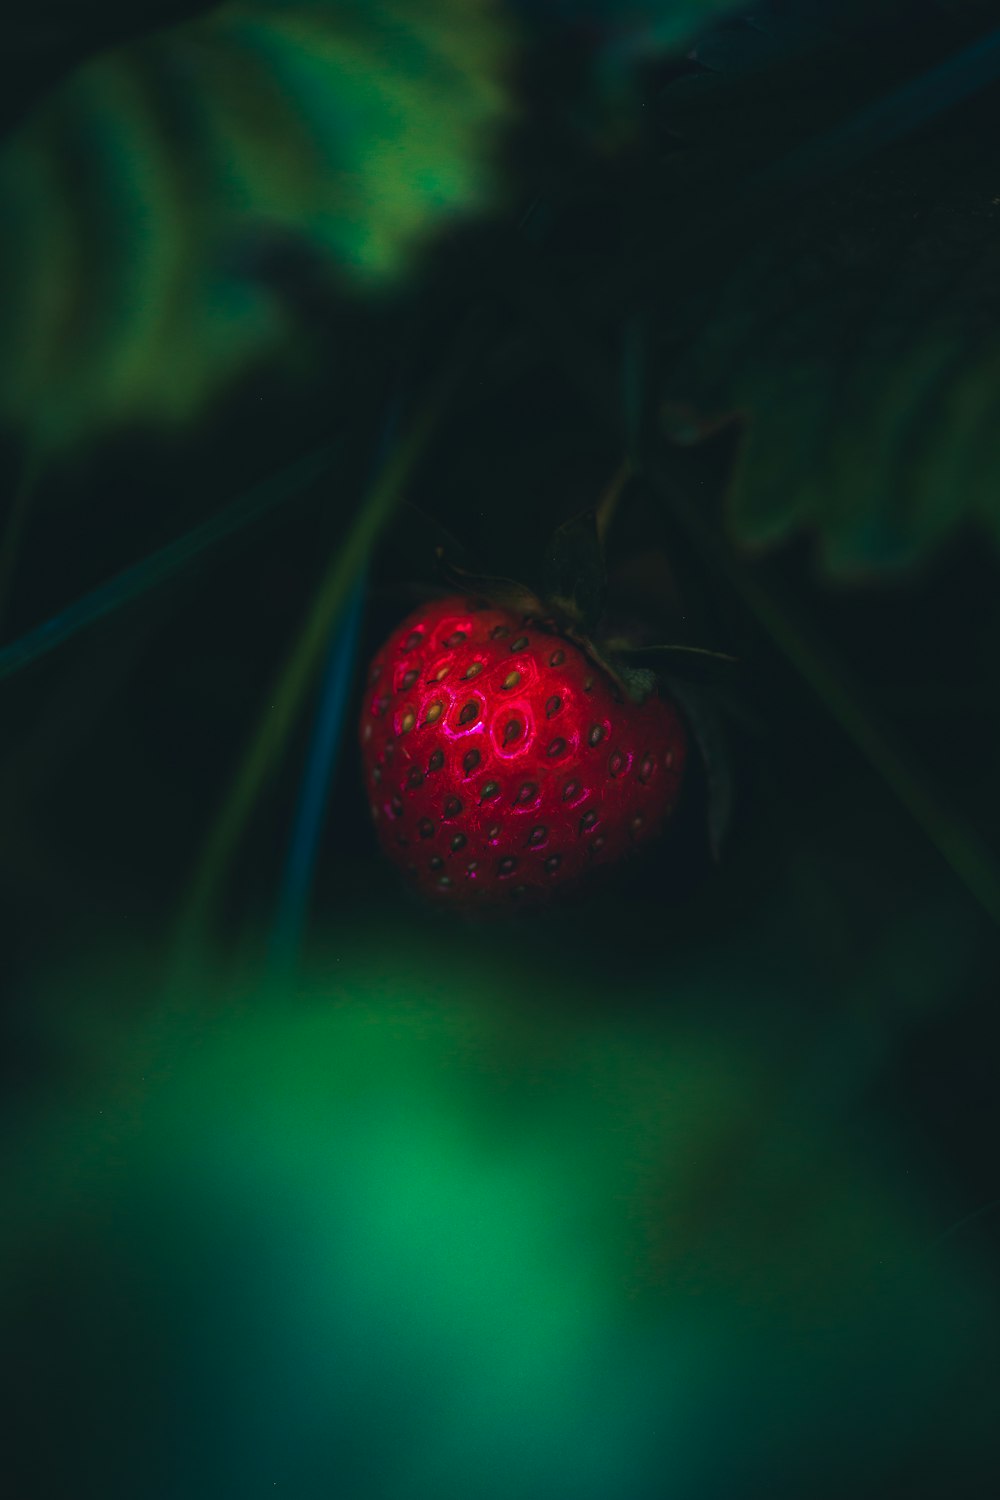 red strawberry in green background